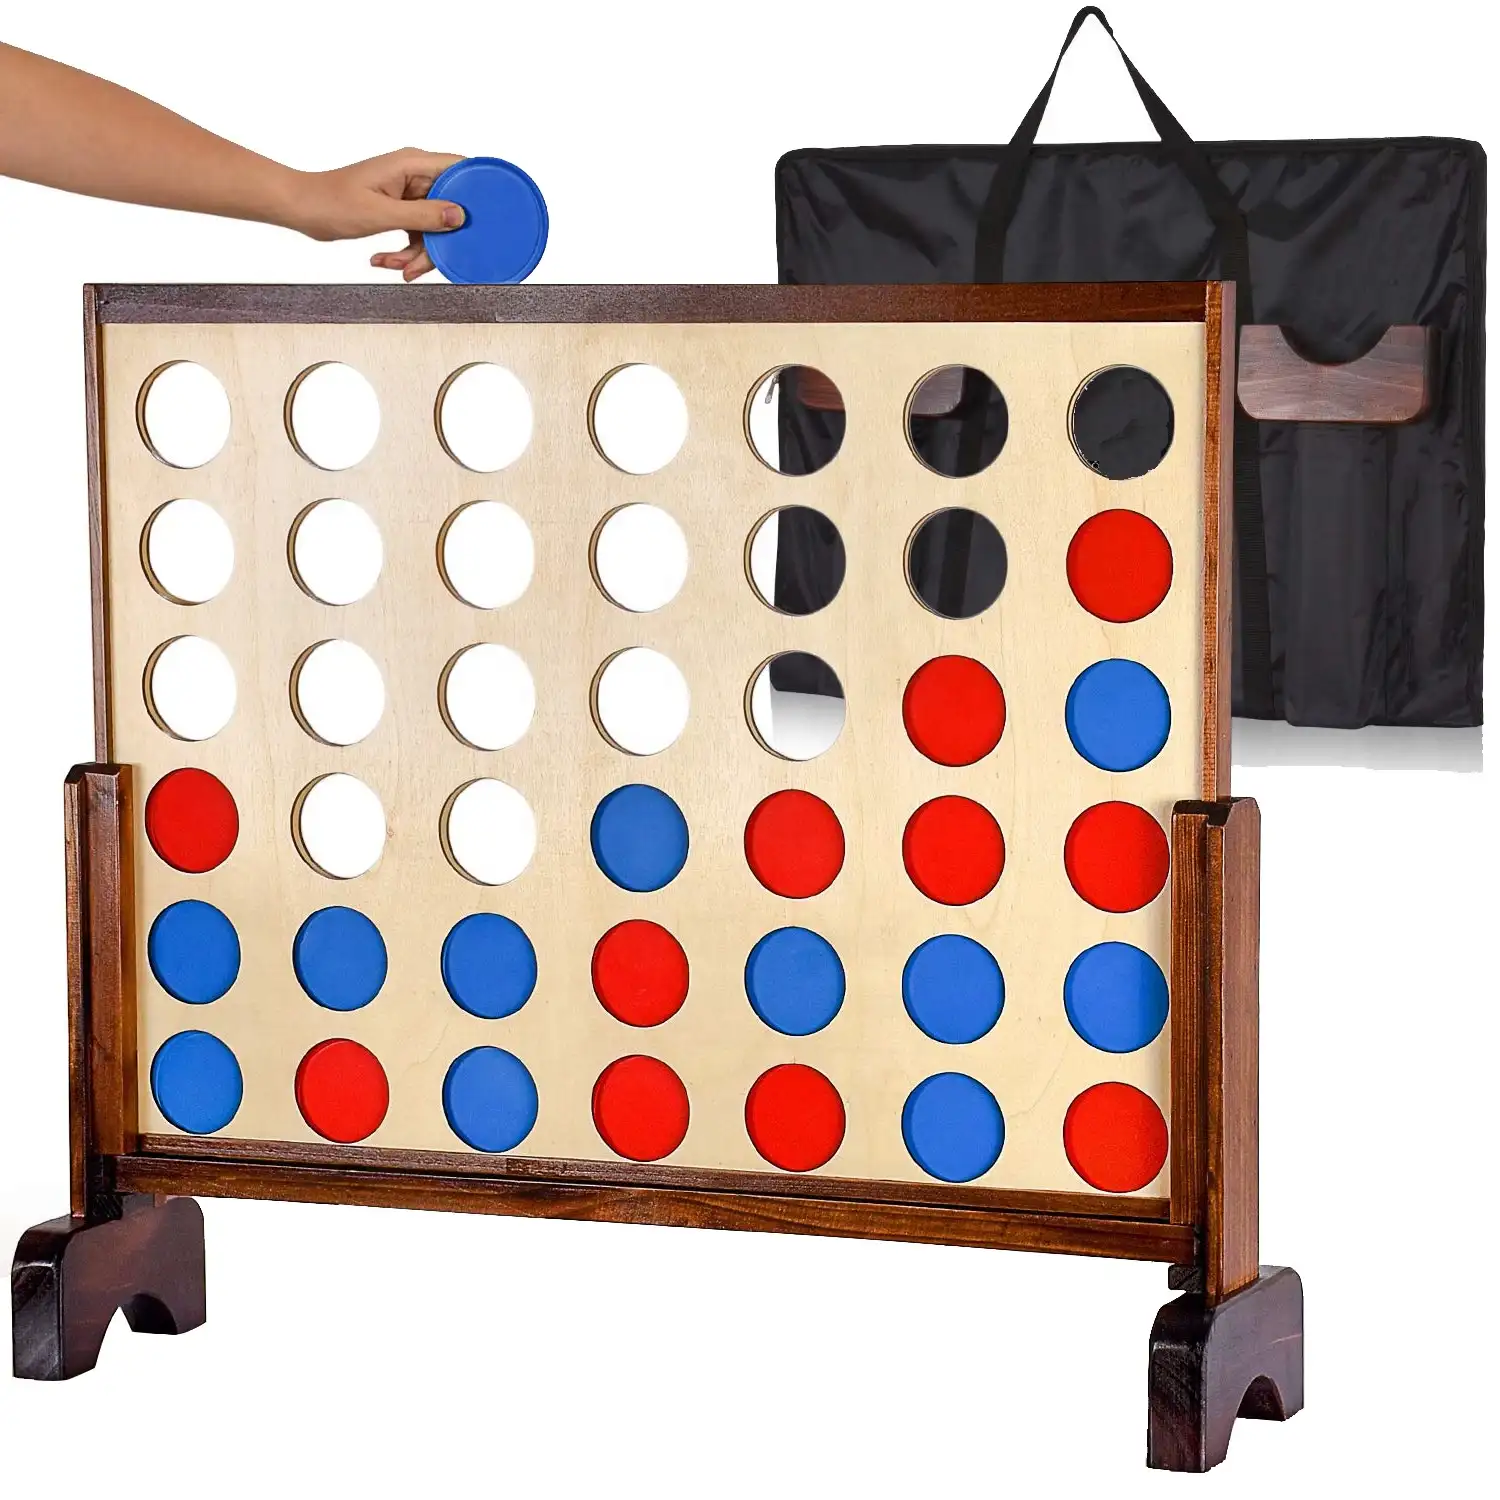 Classic game connect four 4 in a row game for kis and adult